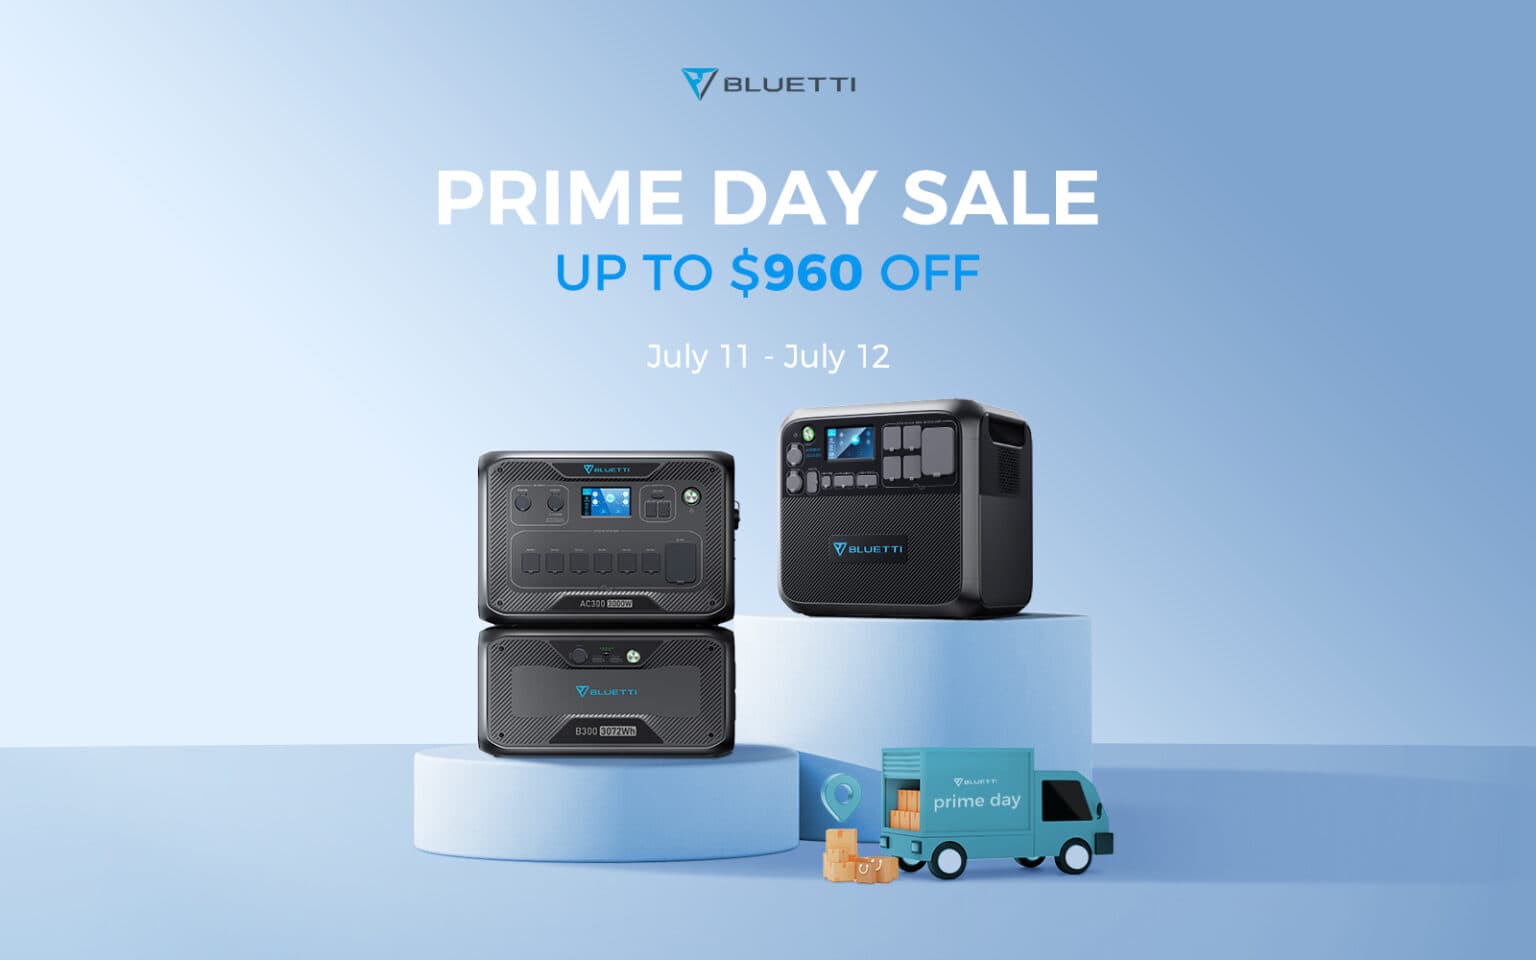 Bluetti's Prime Day Sale offers huge savings and doesn't require an Amazon Prime membership.